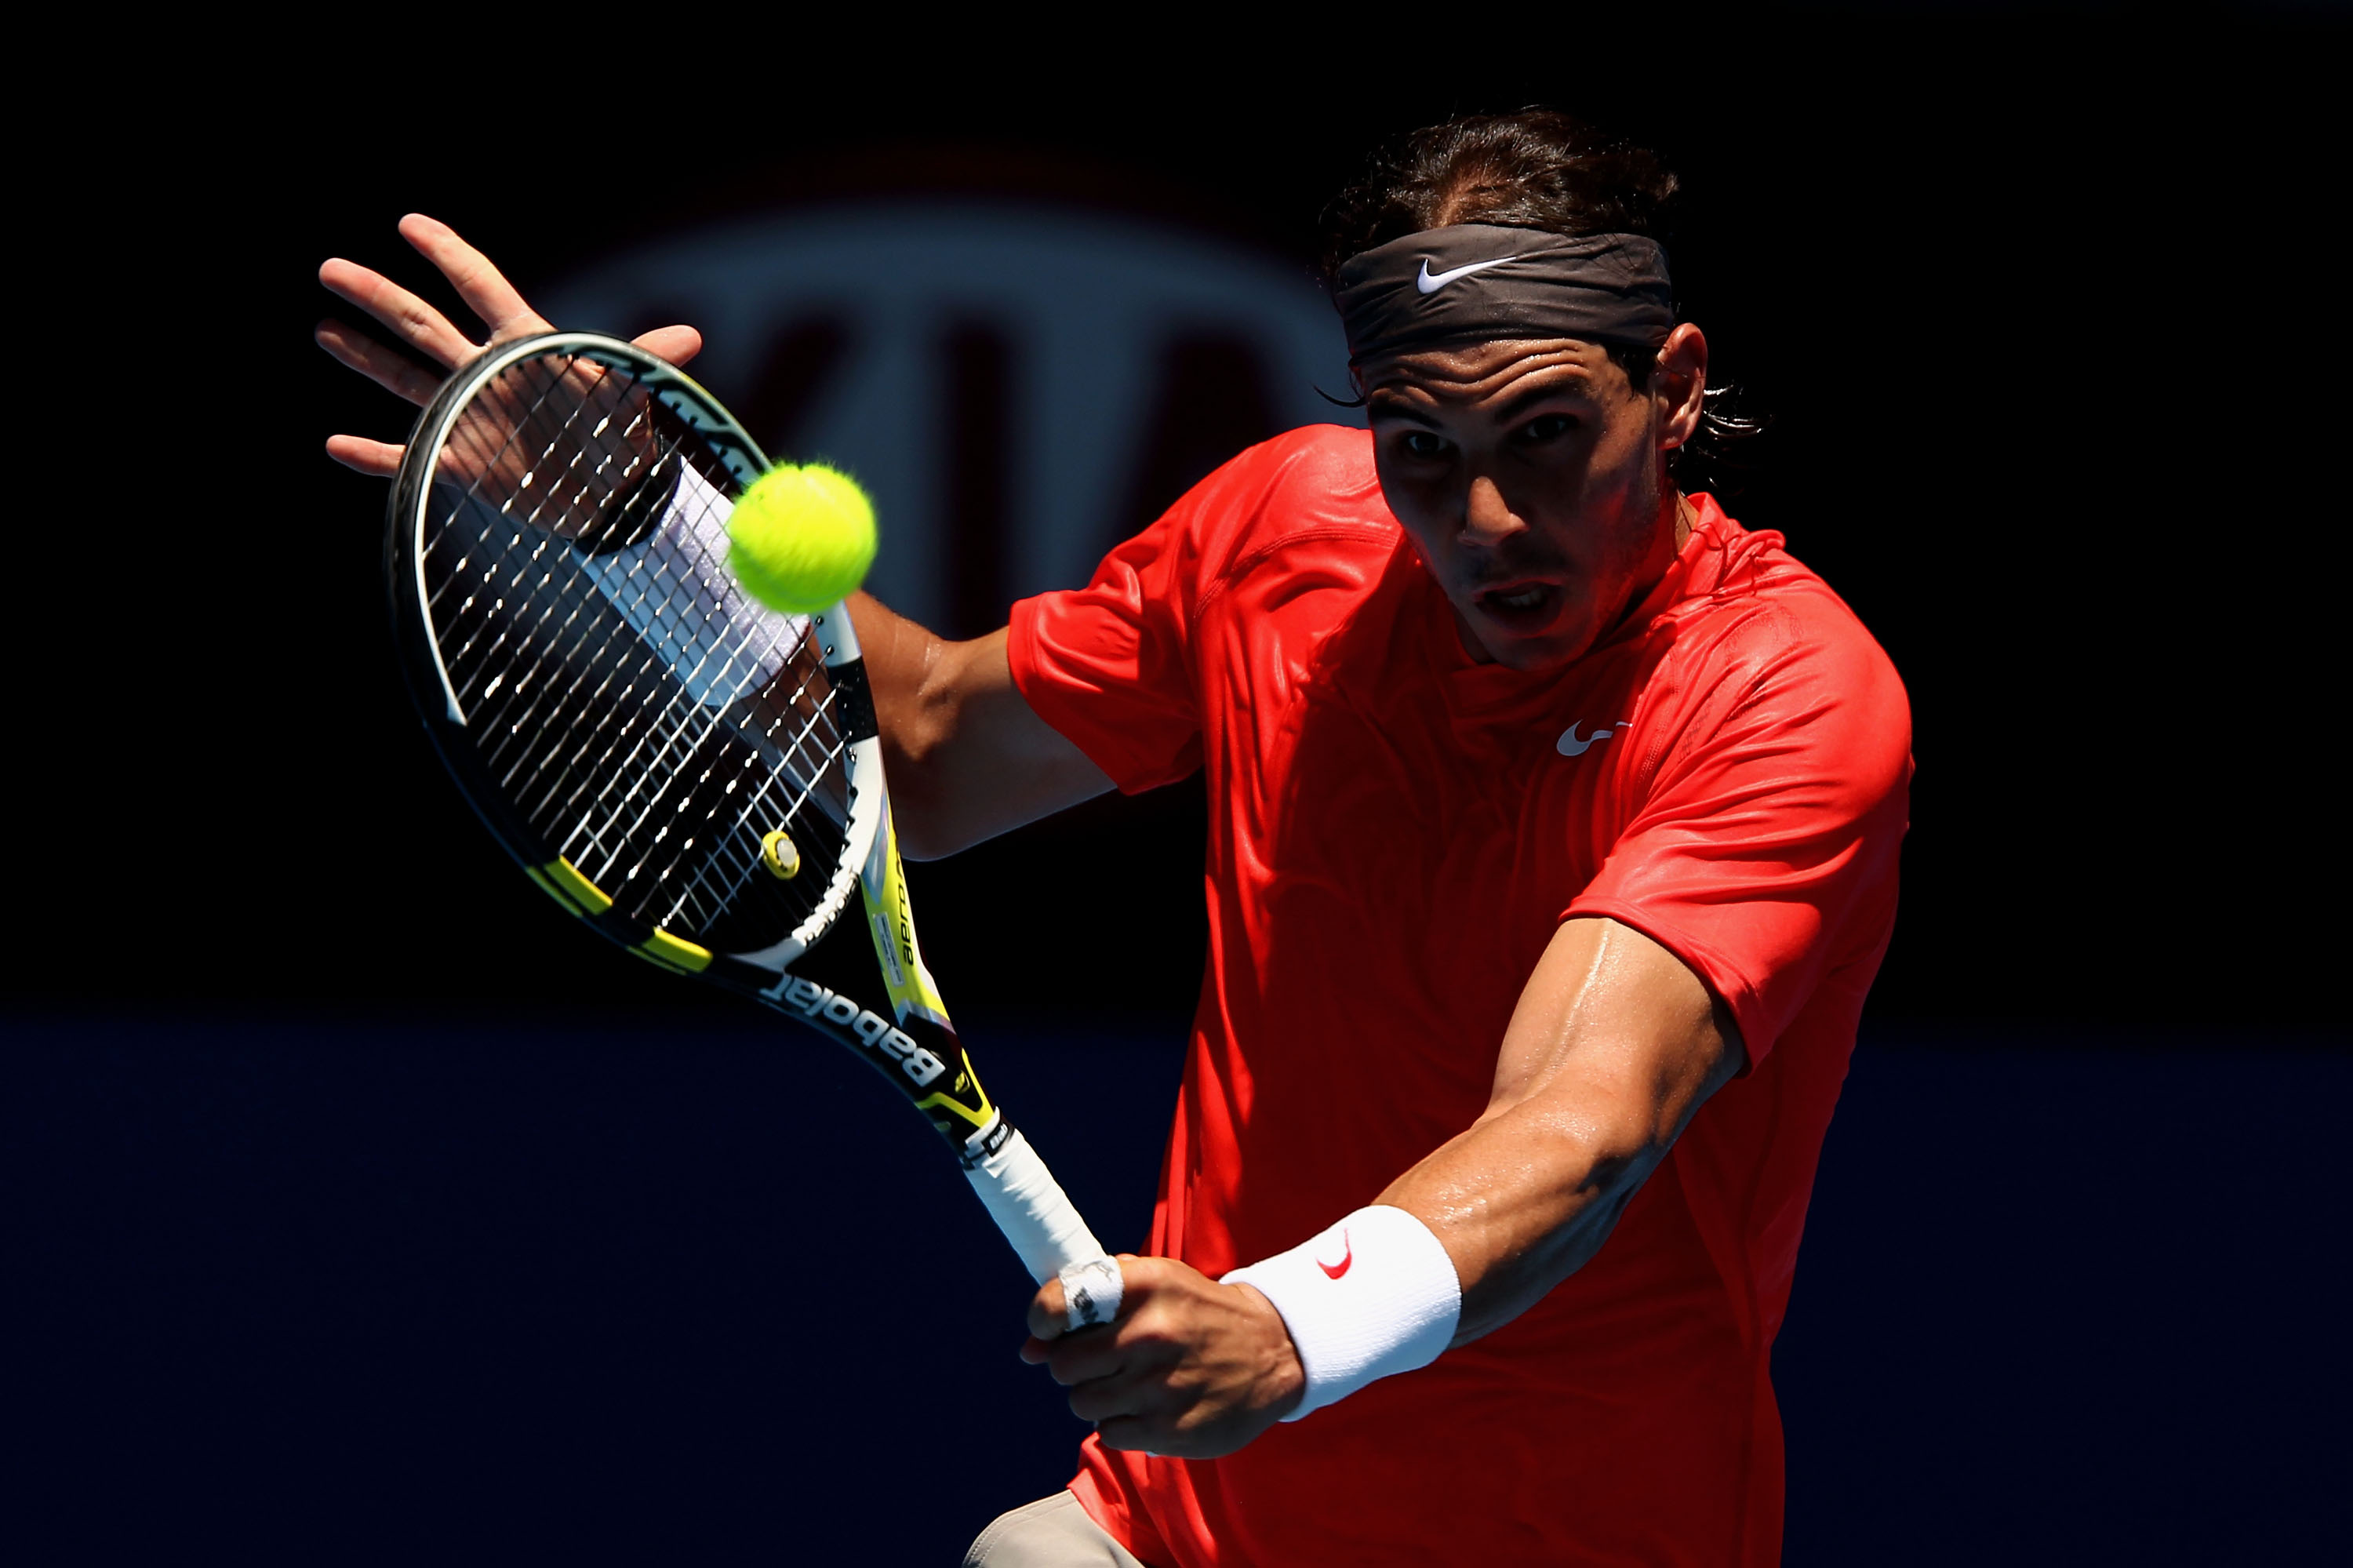 MELBOURNE, AUSTRALIA - JANUARY 20:  Rafael Nadal of Spain plays a backhand in his second round match against Ryan Sweeting of the United States of America during day four of the 2011 Australian Open at Melbourne Park on January 20, 2011 in Melbourne, Aust